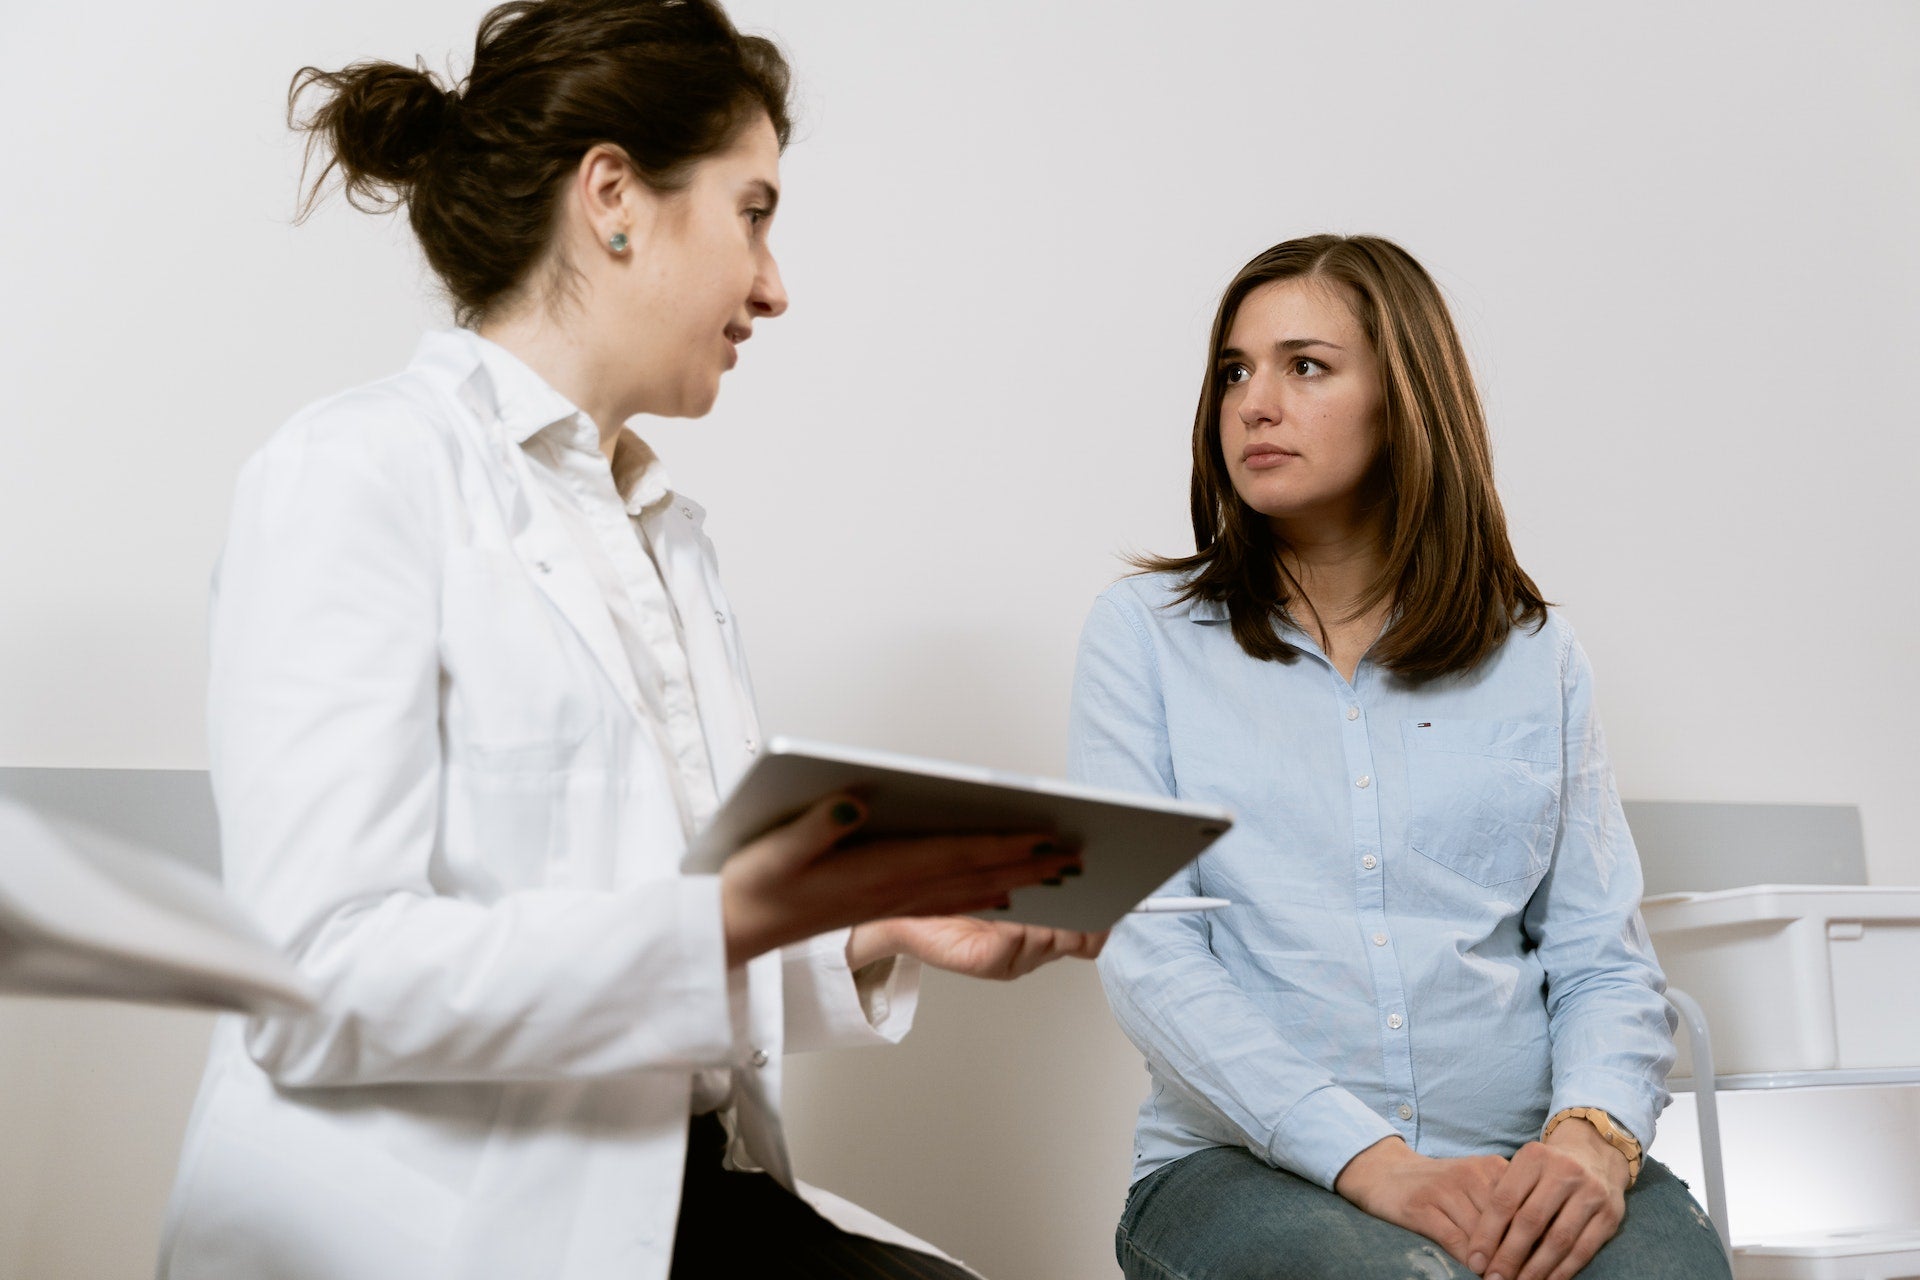 A woman discusses a medical chart with a doctor in a doctor's office.